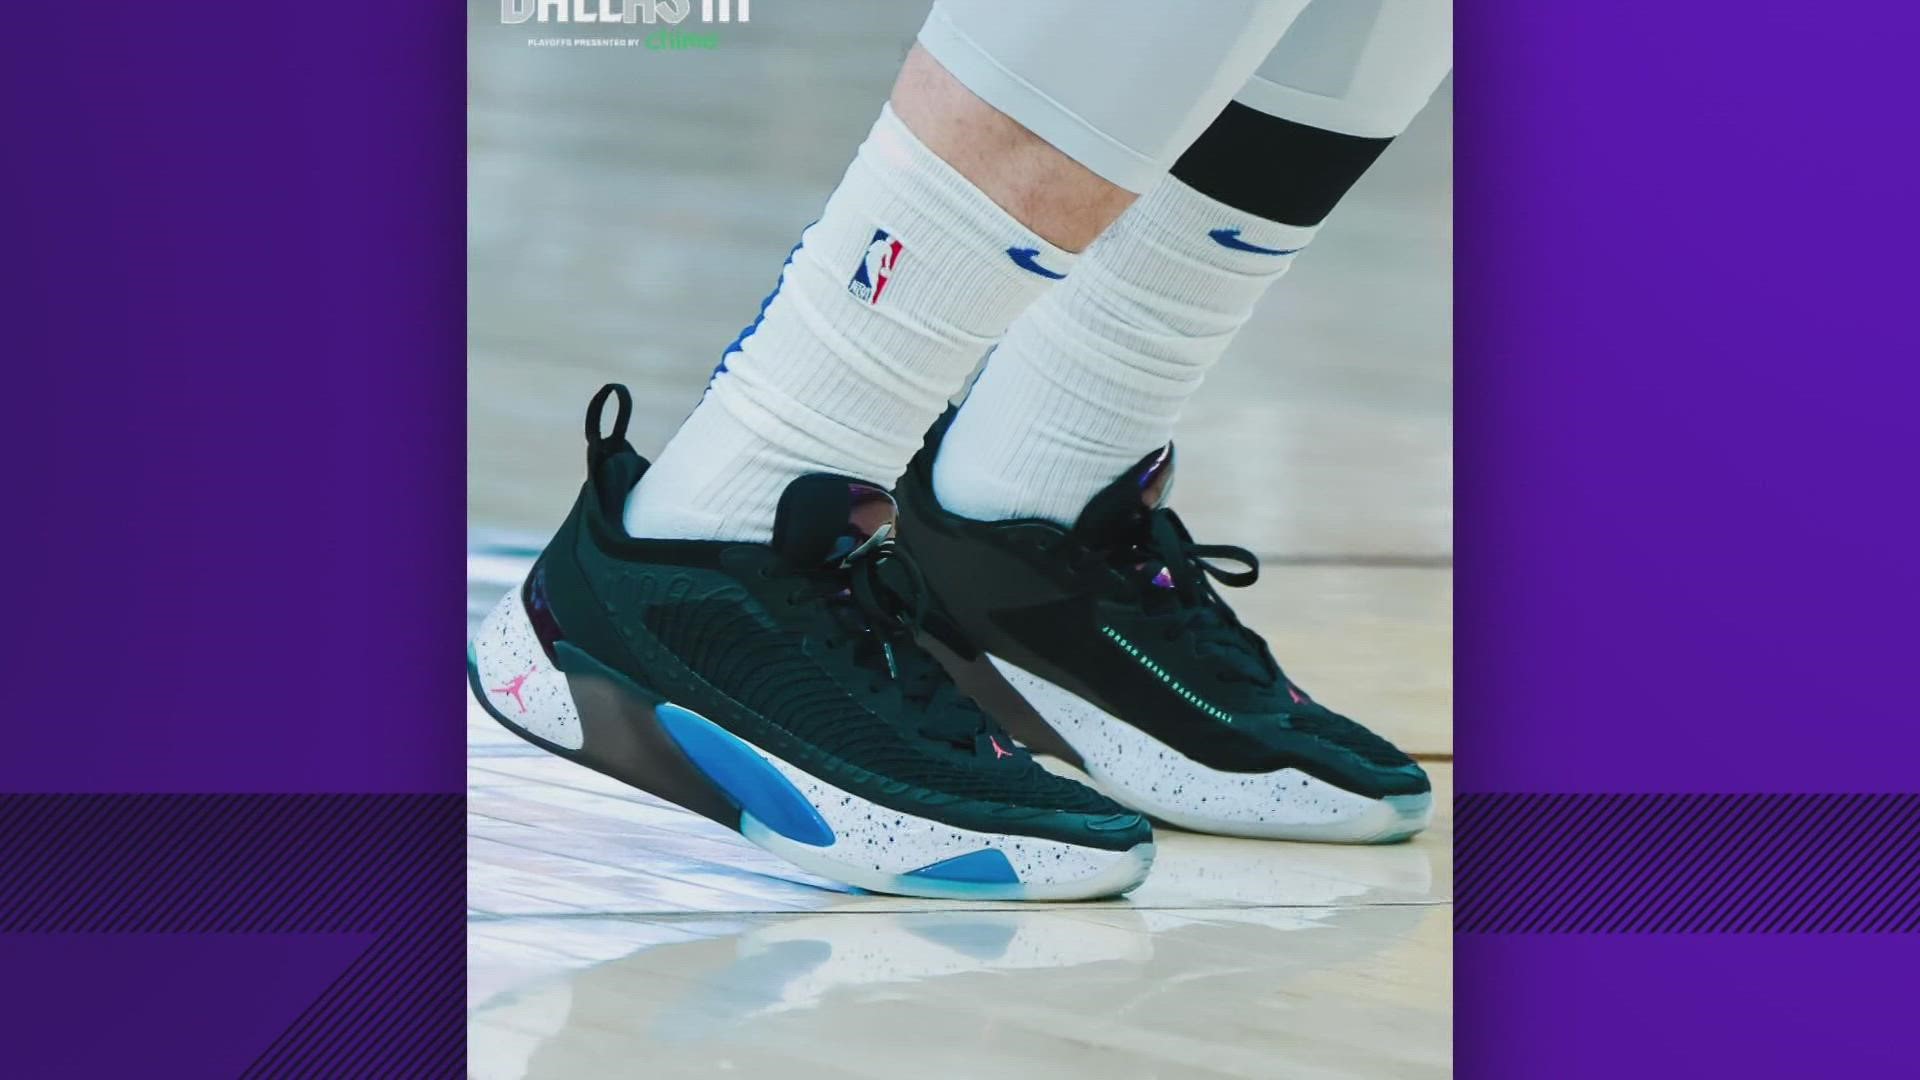 The Jordan Luka 1 is scheduled to release this summer.